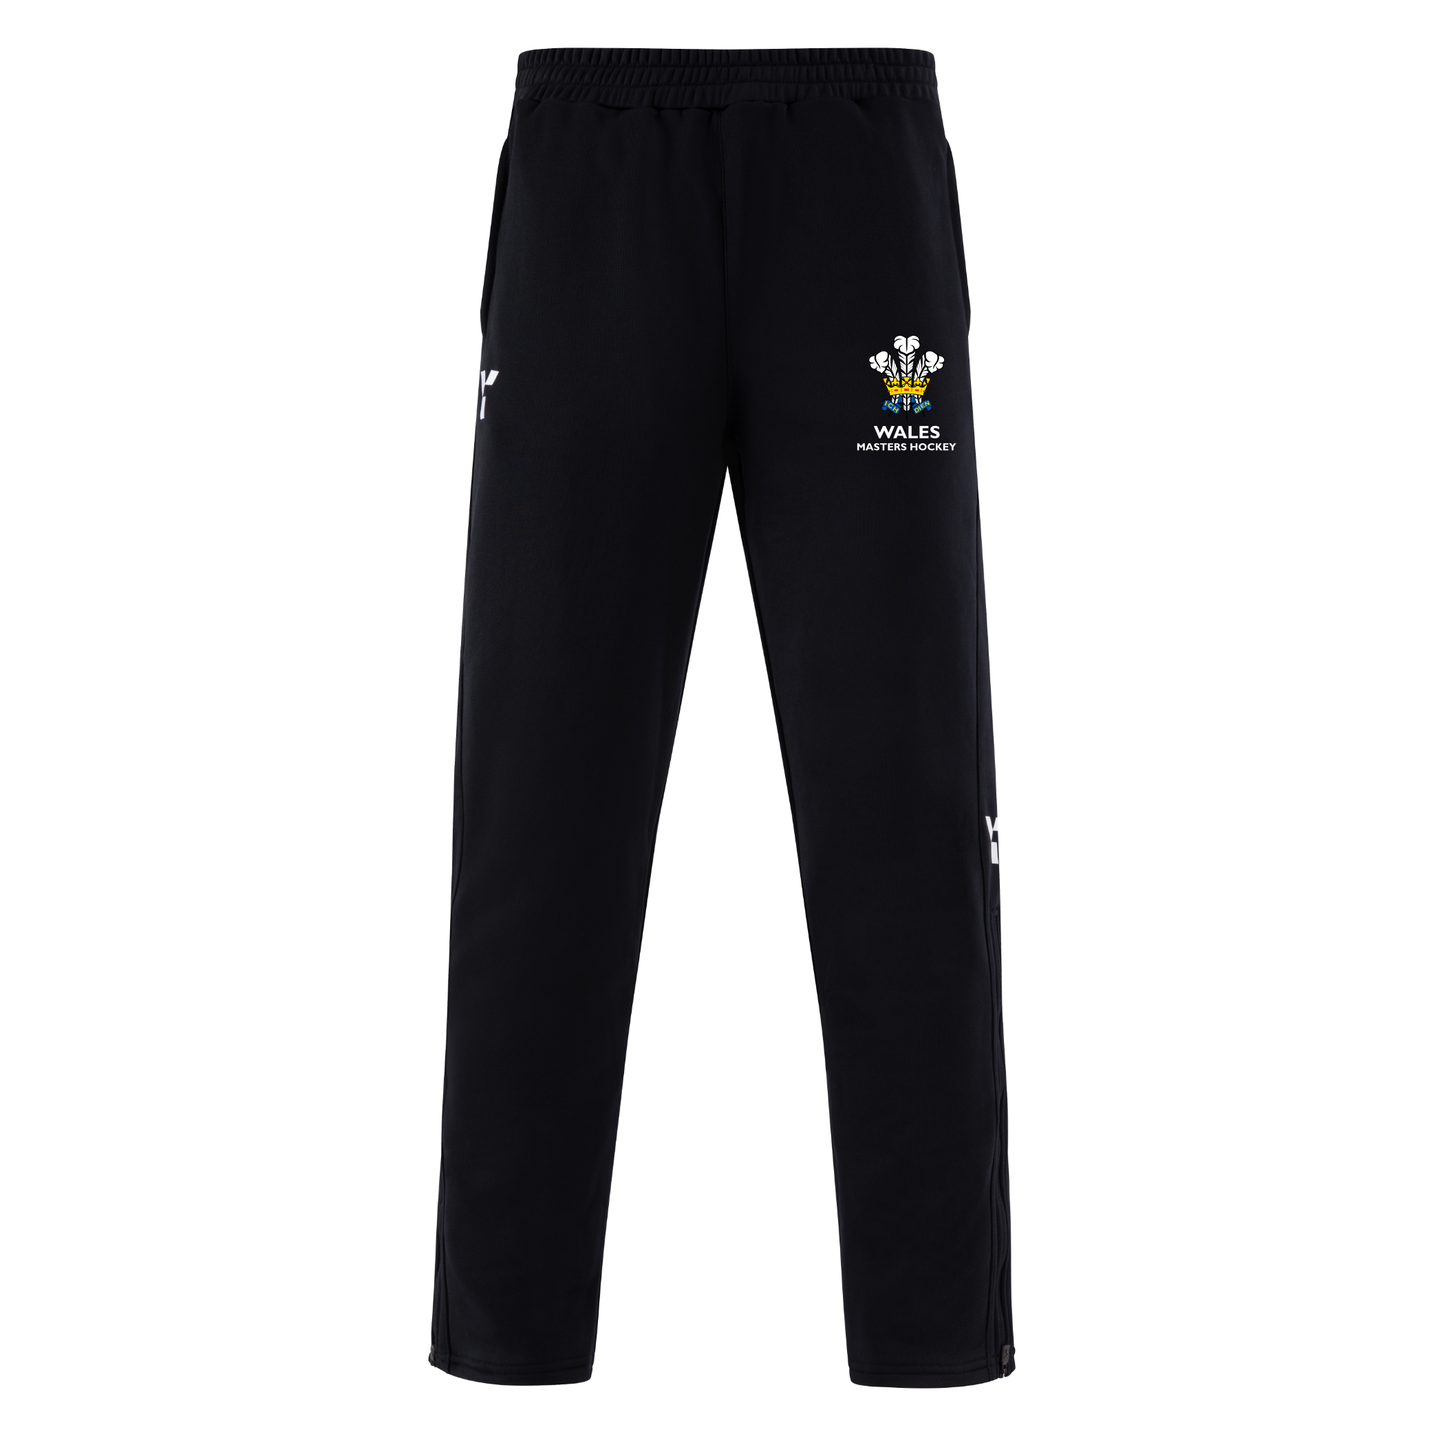 Wales Masters - Tracksuit Bottoms Women's Black